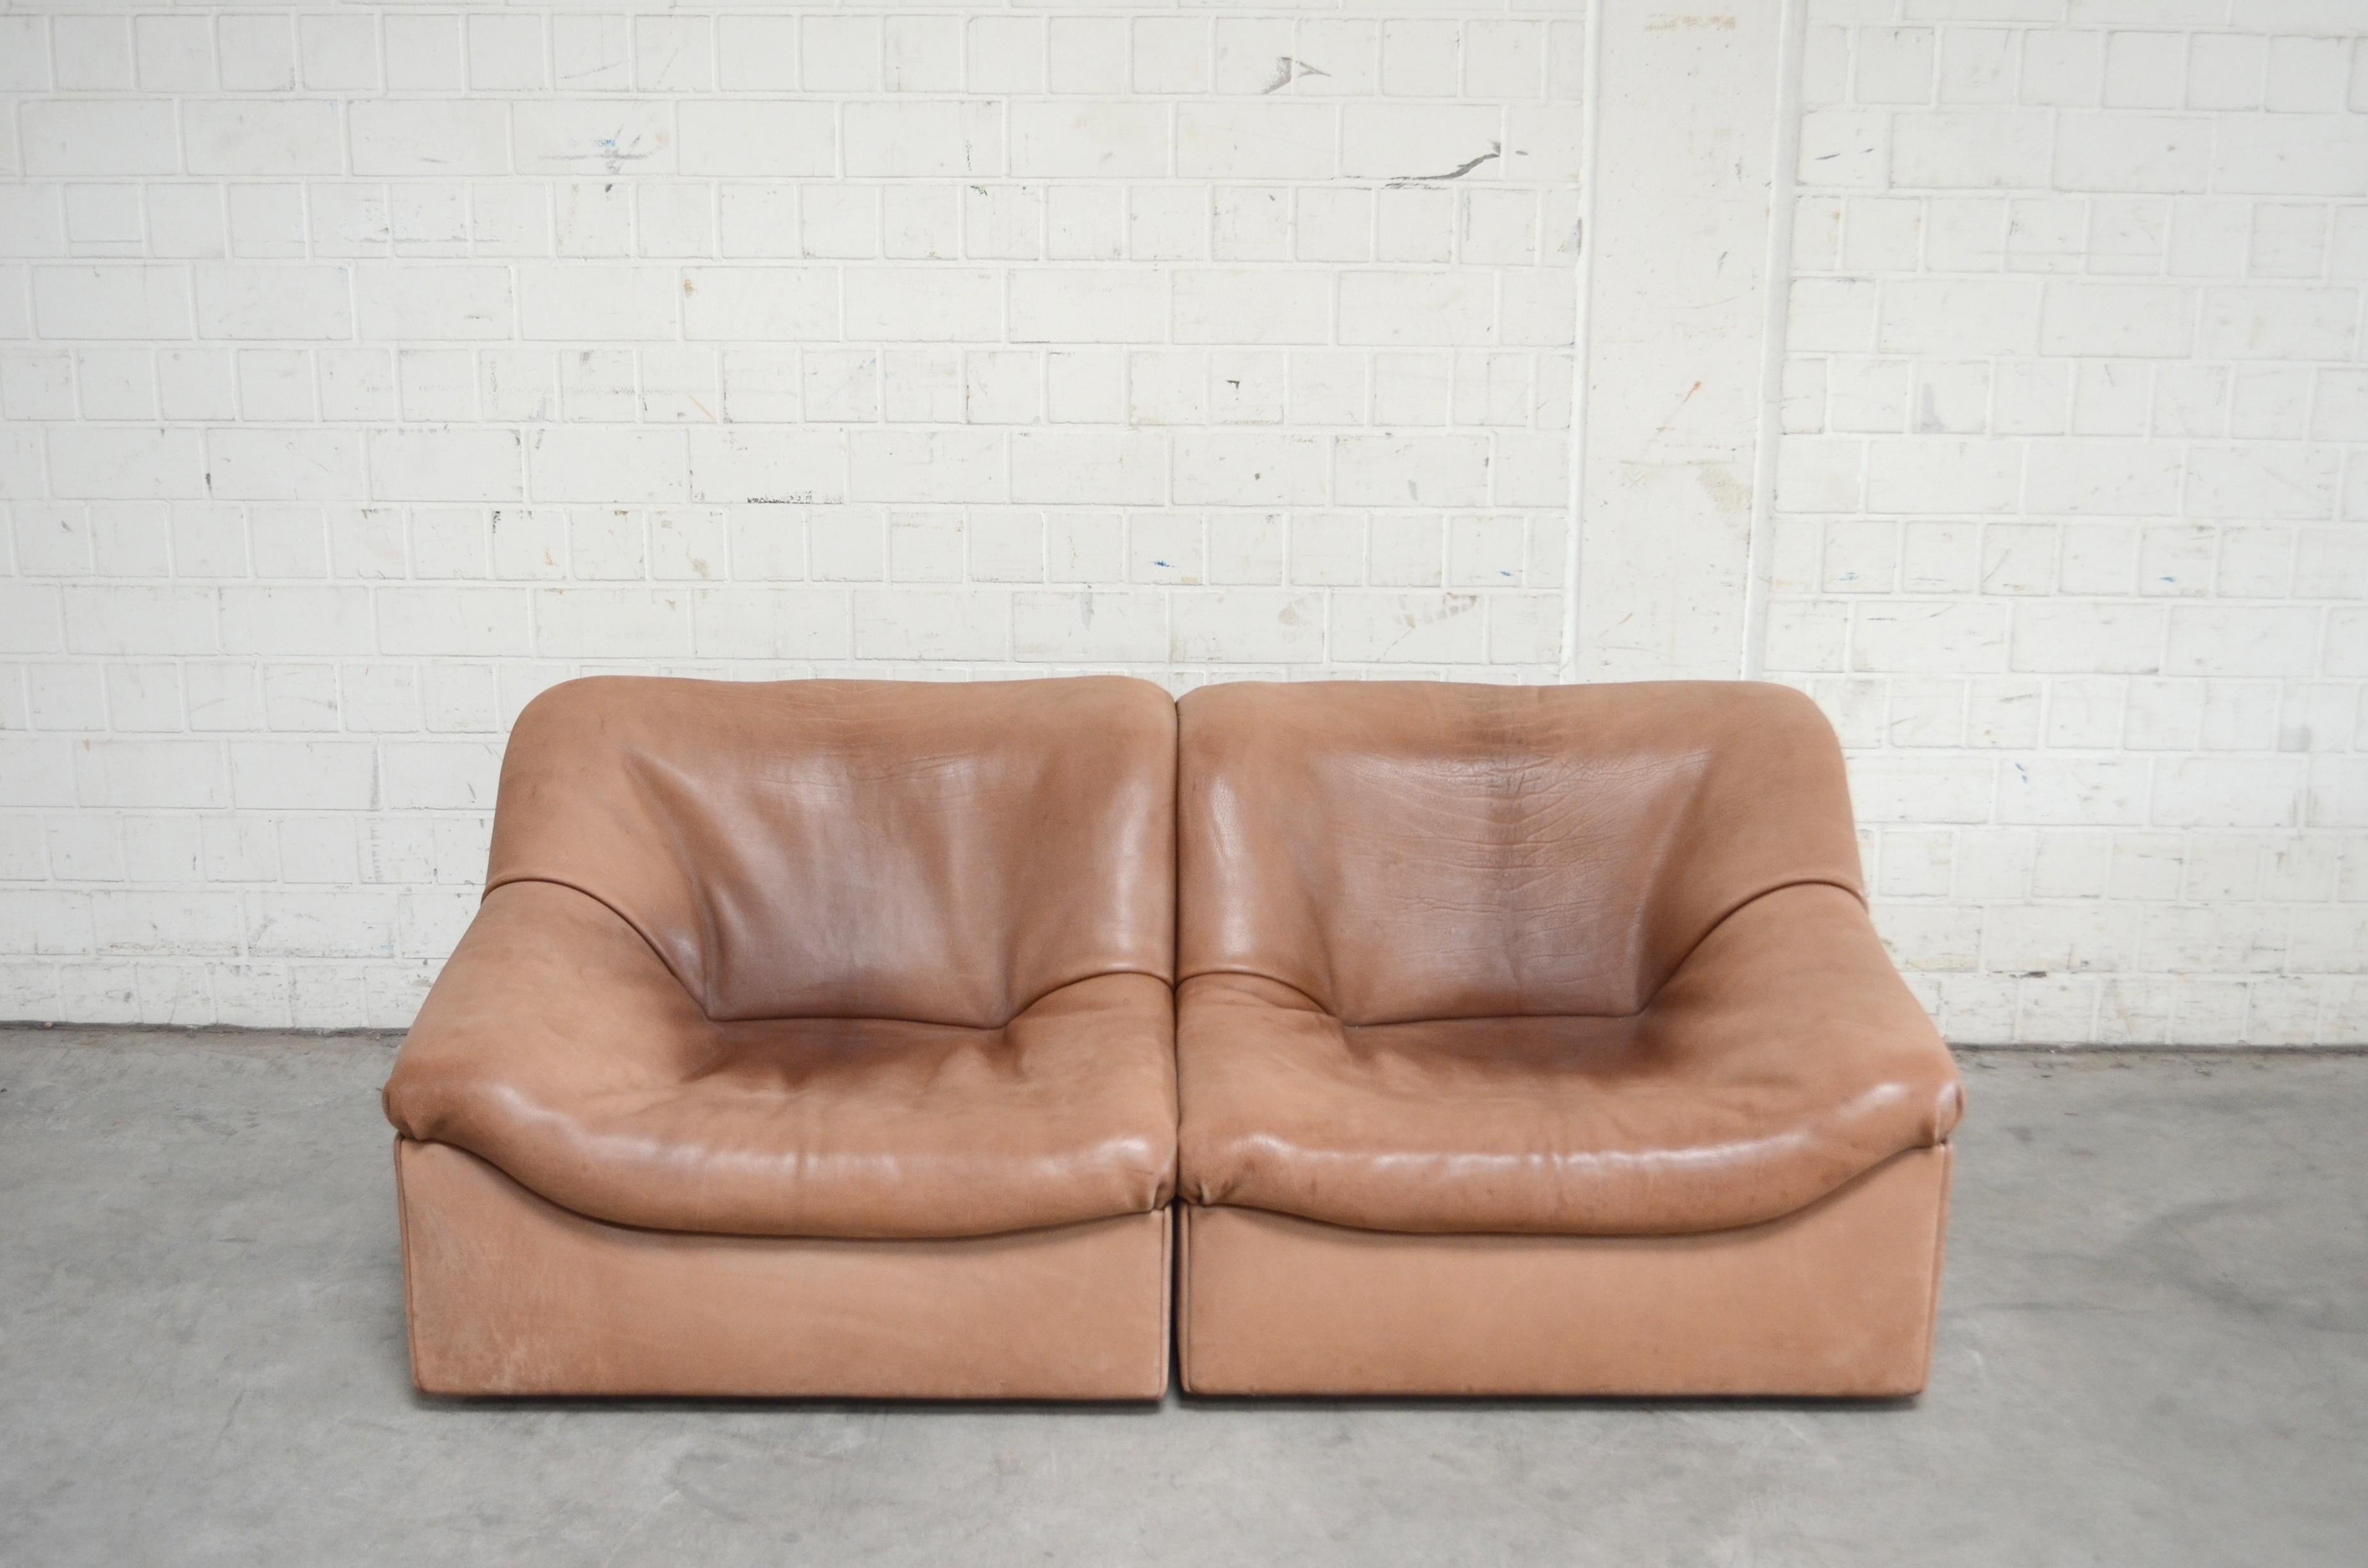 De Sede DS 46 neck leather sofa.
It´s a Sofa for 2 persons.
This DS-46 sofa was manufactured in Switzerland by De Sede and is upholstered in 3-5 mm thick, natural hide.
it consist 2 elements which can be use also lounge chairs.
The leather color